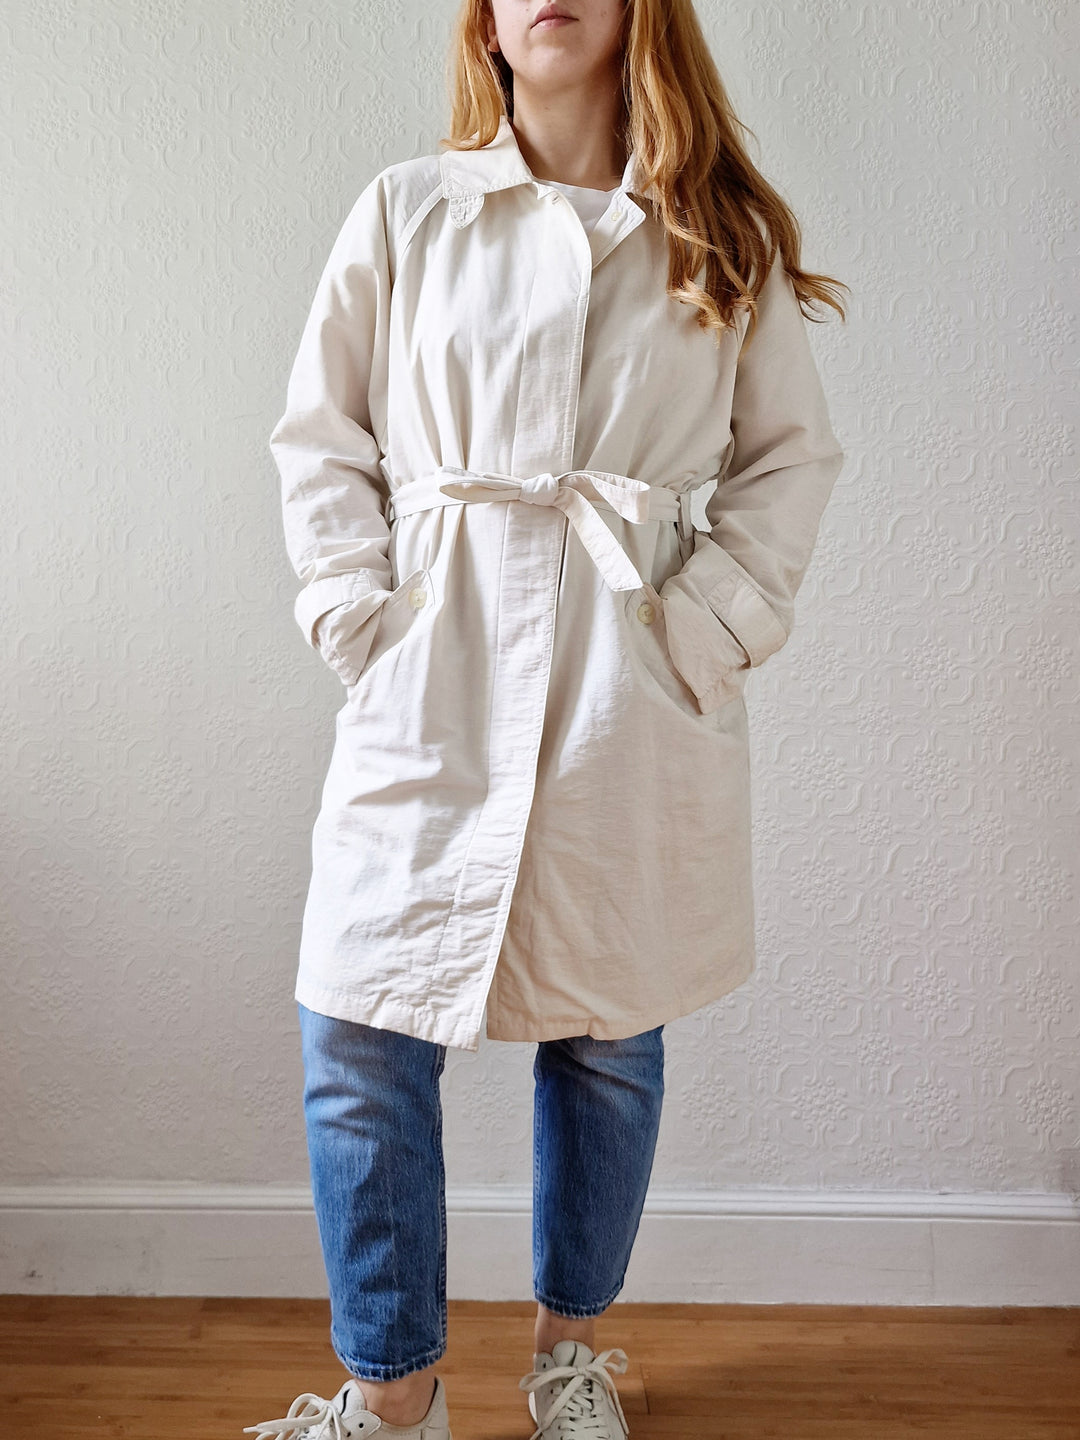 Vintage Lightweight White Single Breasted Trench Coat with Belt - S/M